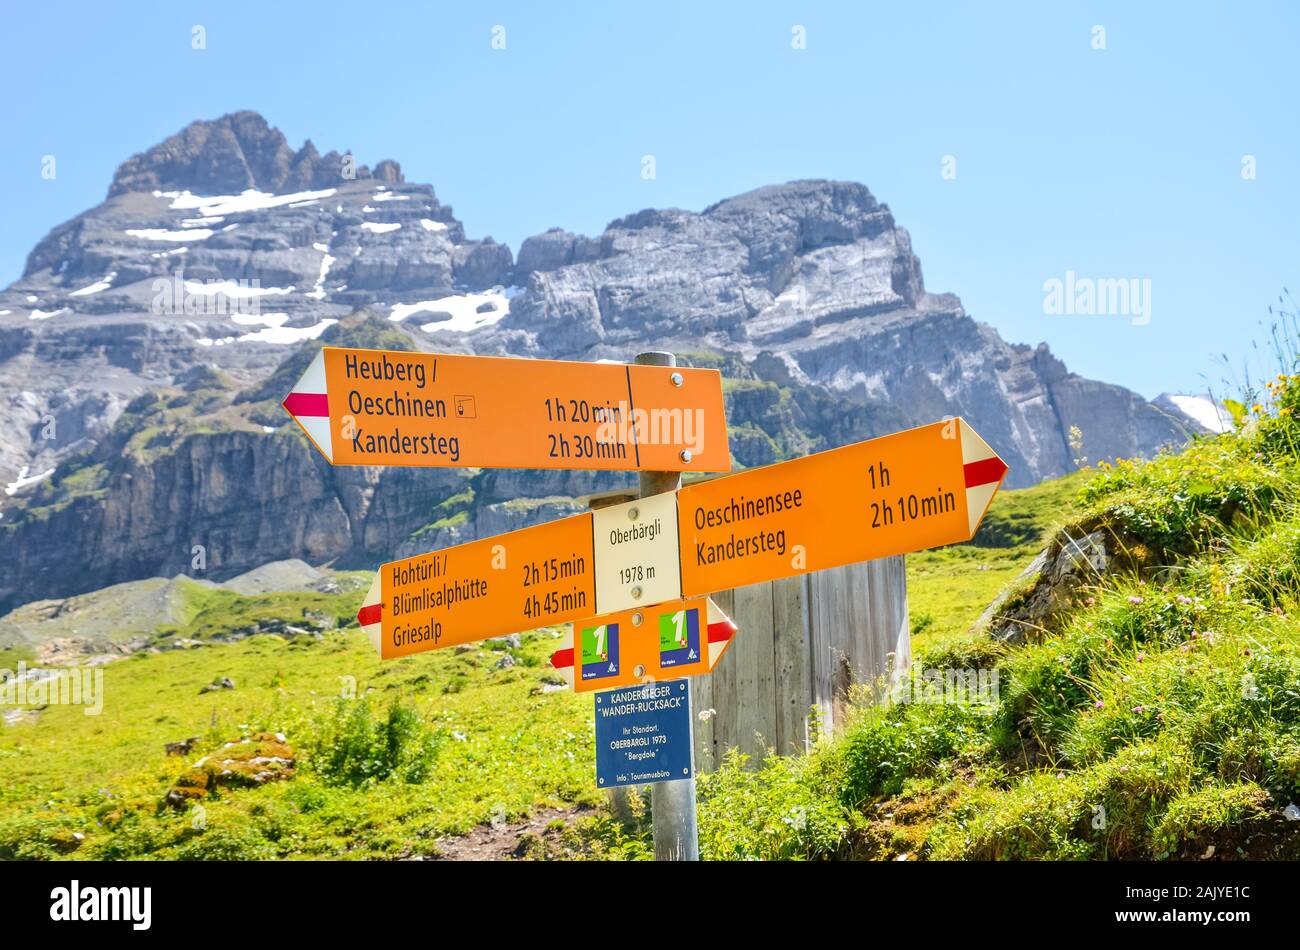 Kandersteg, Switzerland - August 4 2019: Tourist sign in Oberbargli on the  trail to Oeschinensee lake in the Swiss Alps. Information sign giving  directions and walking time. Summer Alpine landscape Stock Photo - Alamy